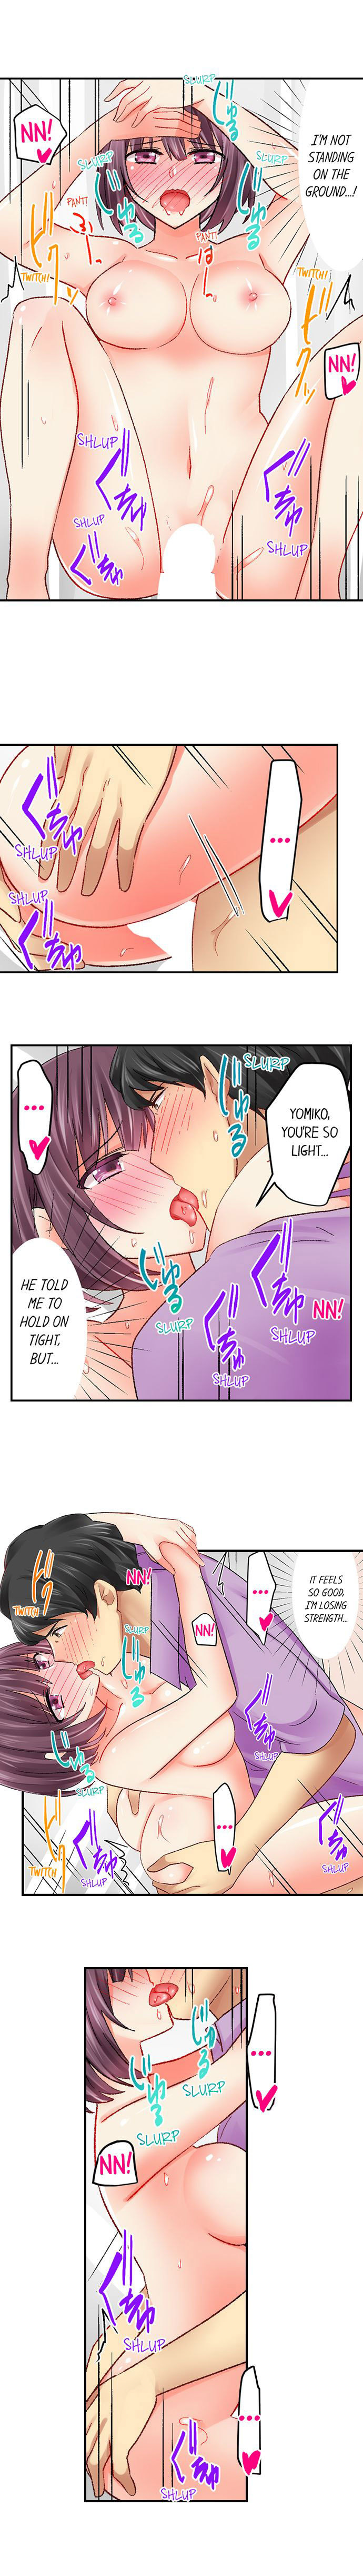 Our Kinky Newlywed Life - Chapter 51 Page 6